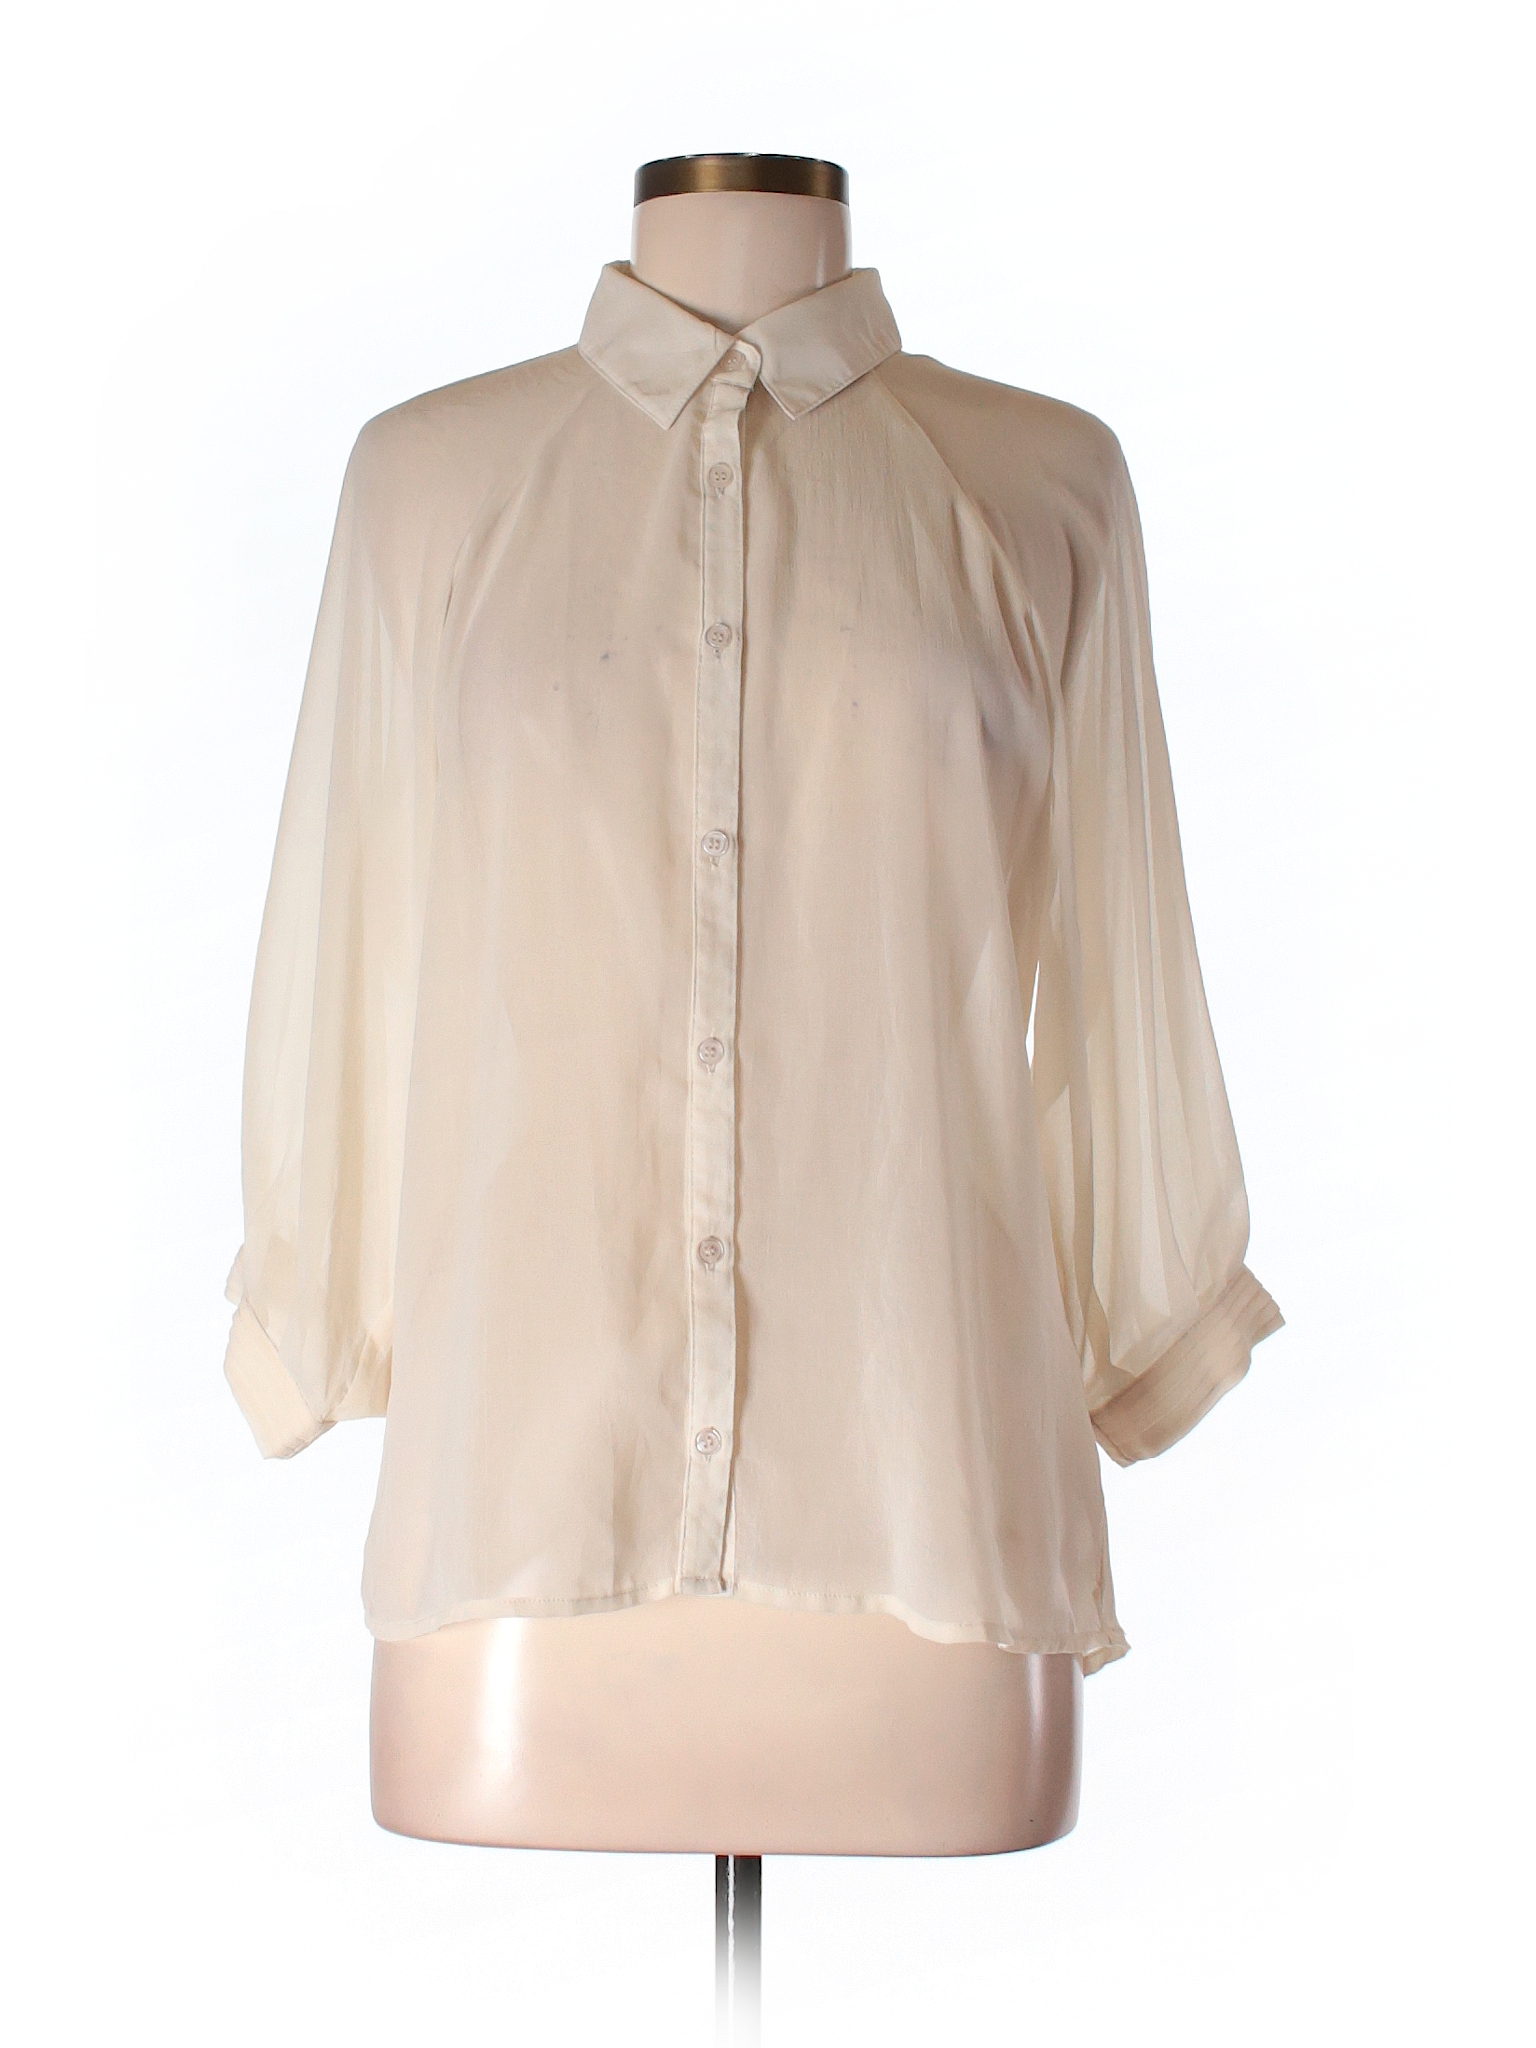 Love 21 3/4 Sleeve Blouse - 79% off only on thredUP